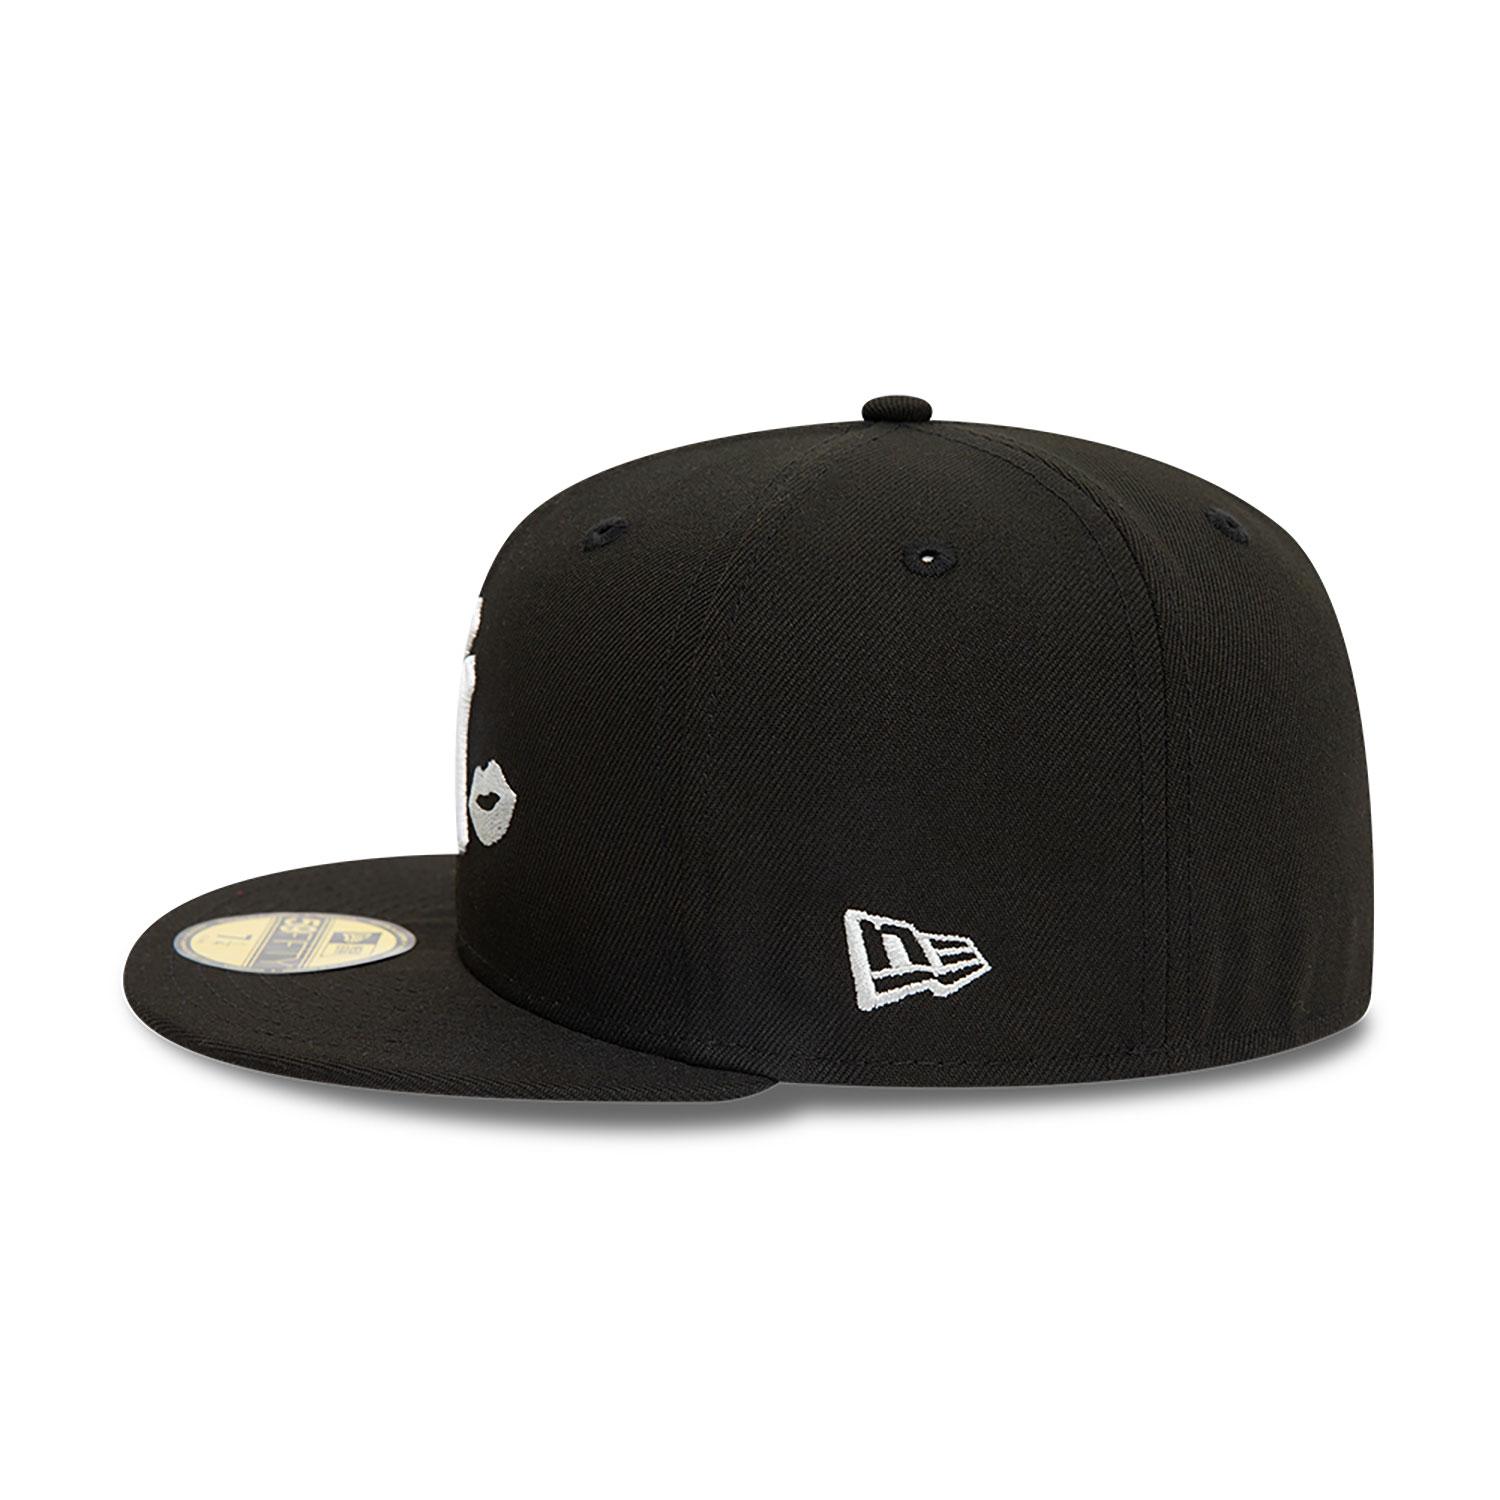 New York Yankees MLB Lips Reloaded 59FIFTY Fitted